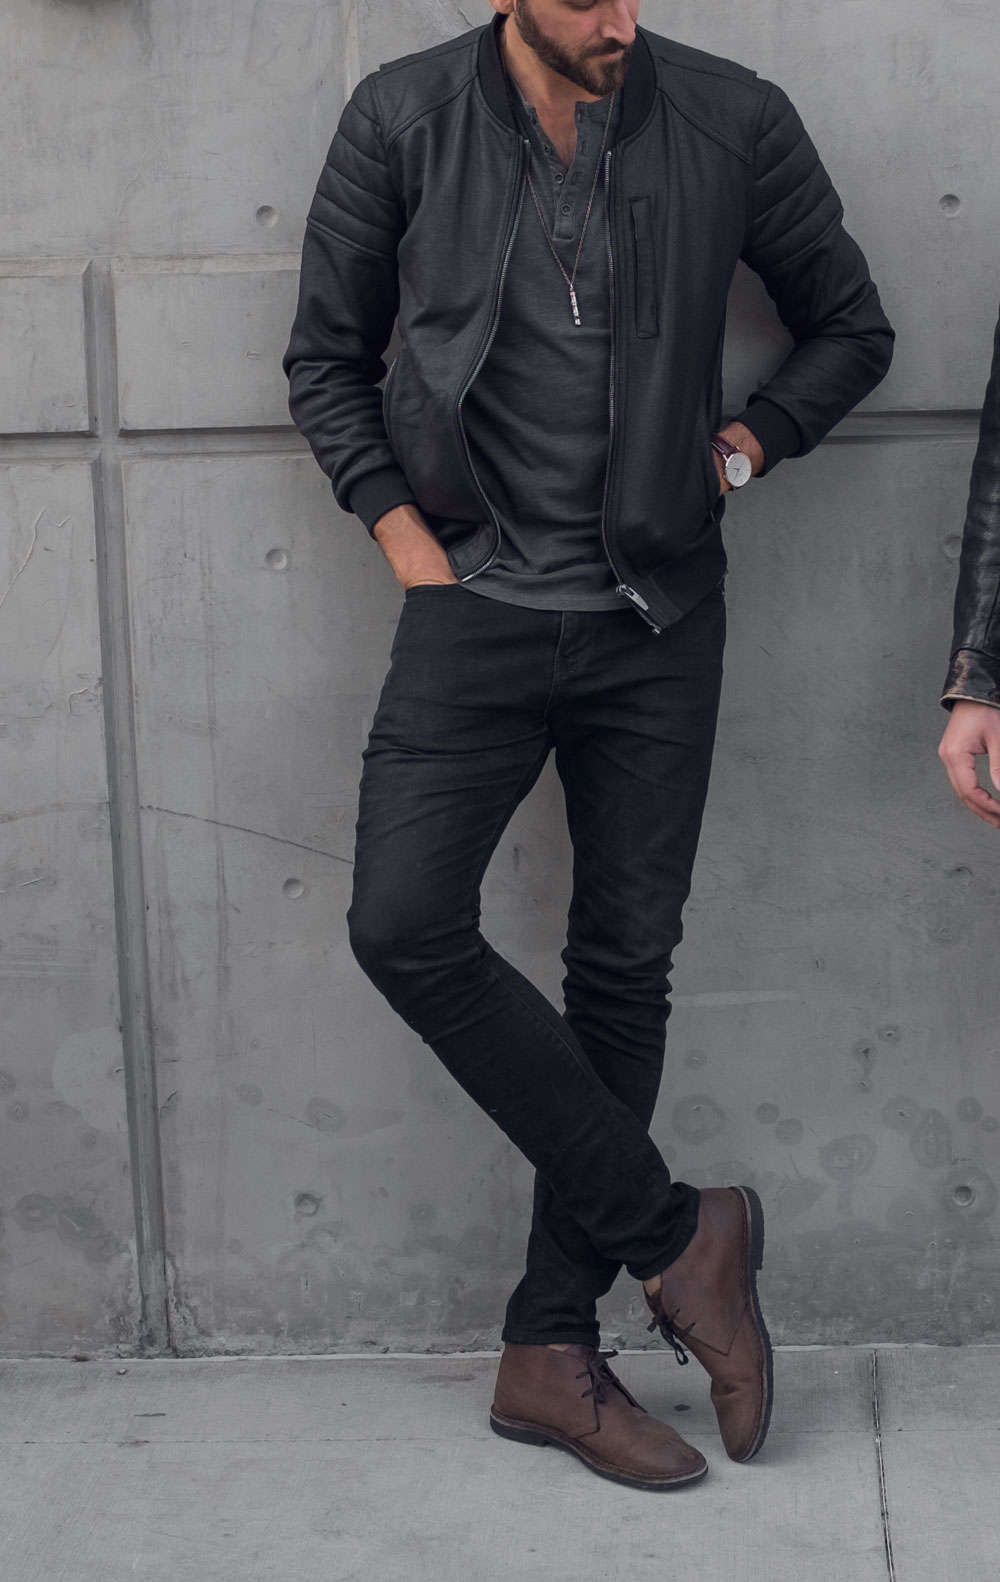 What to wear to a show and drinks   men's casual outfit ideas   black jeans brown boots   leather bomber jacket